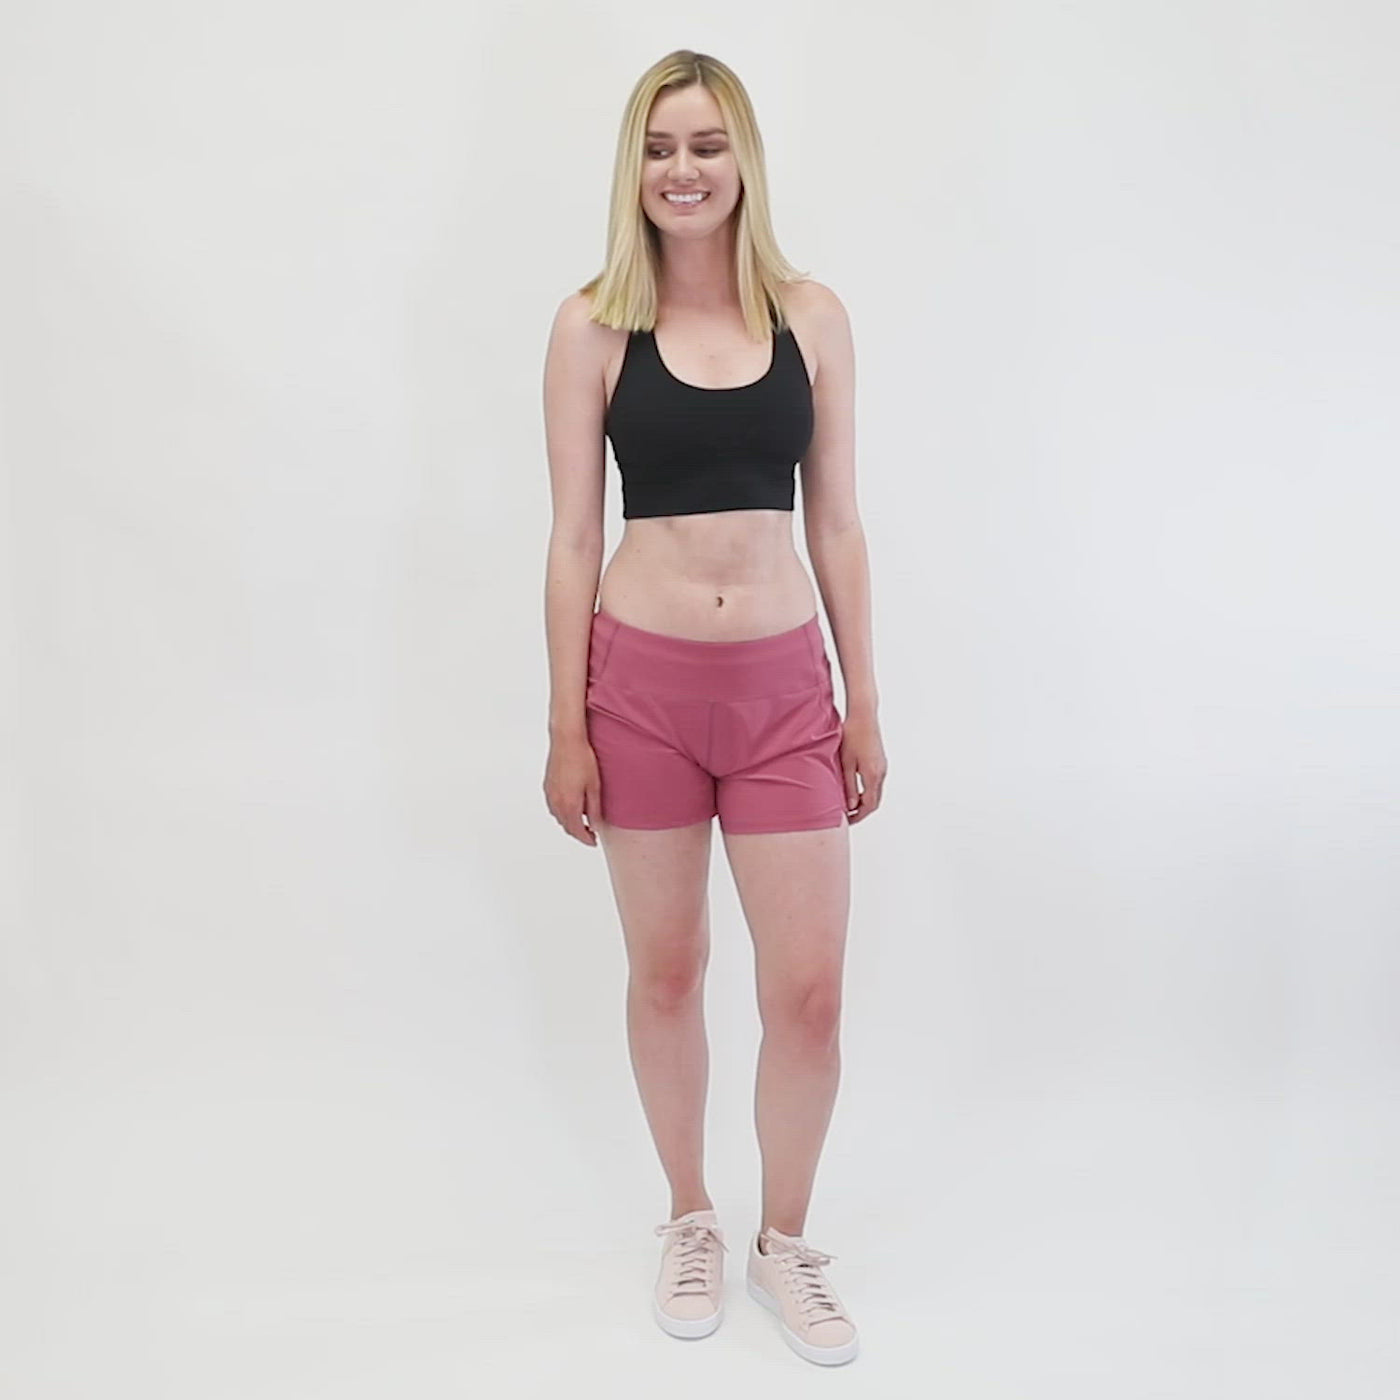 NonZero Gravity Women’s ZinTex Low-Rise Training Shorts made with Recycled Polyester & Spandex in Berry